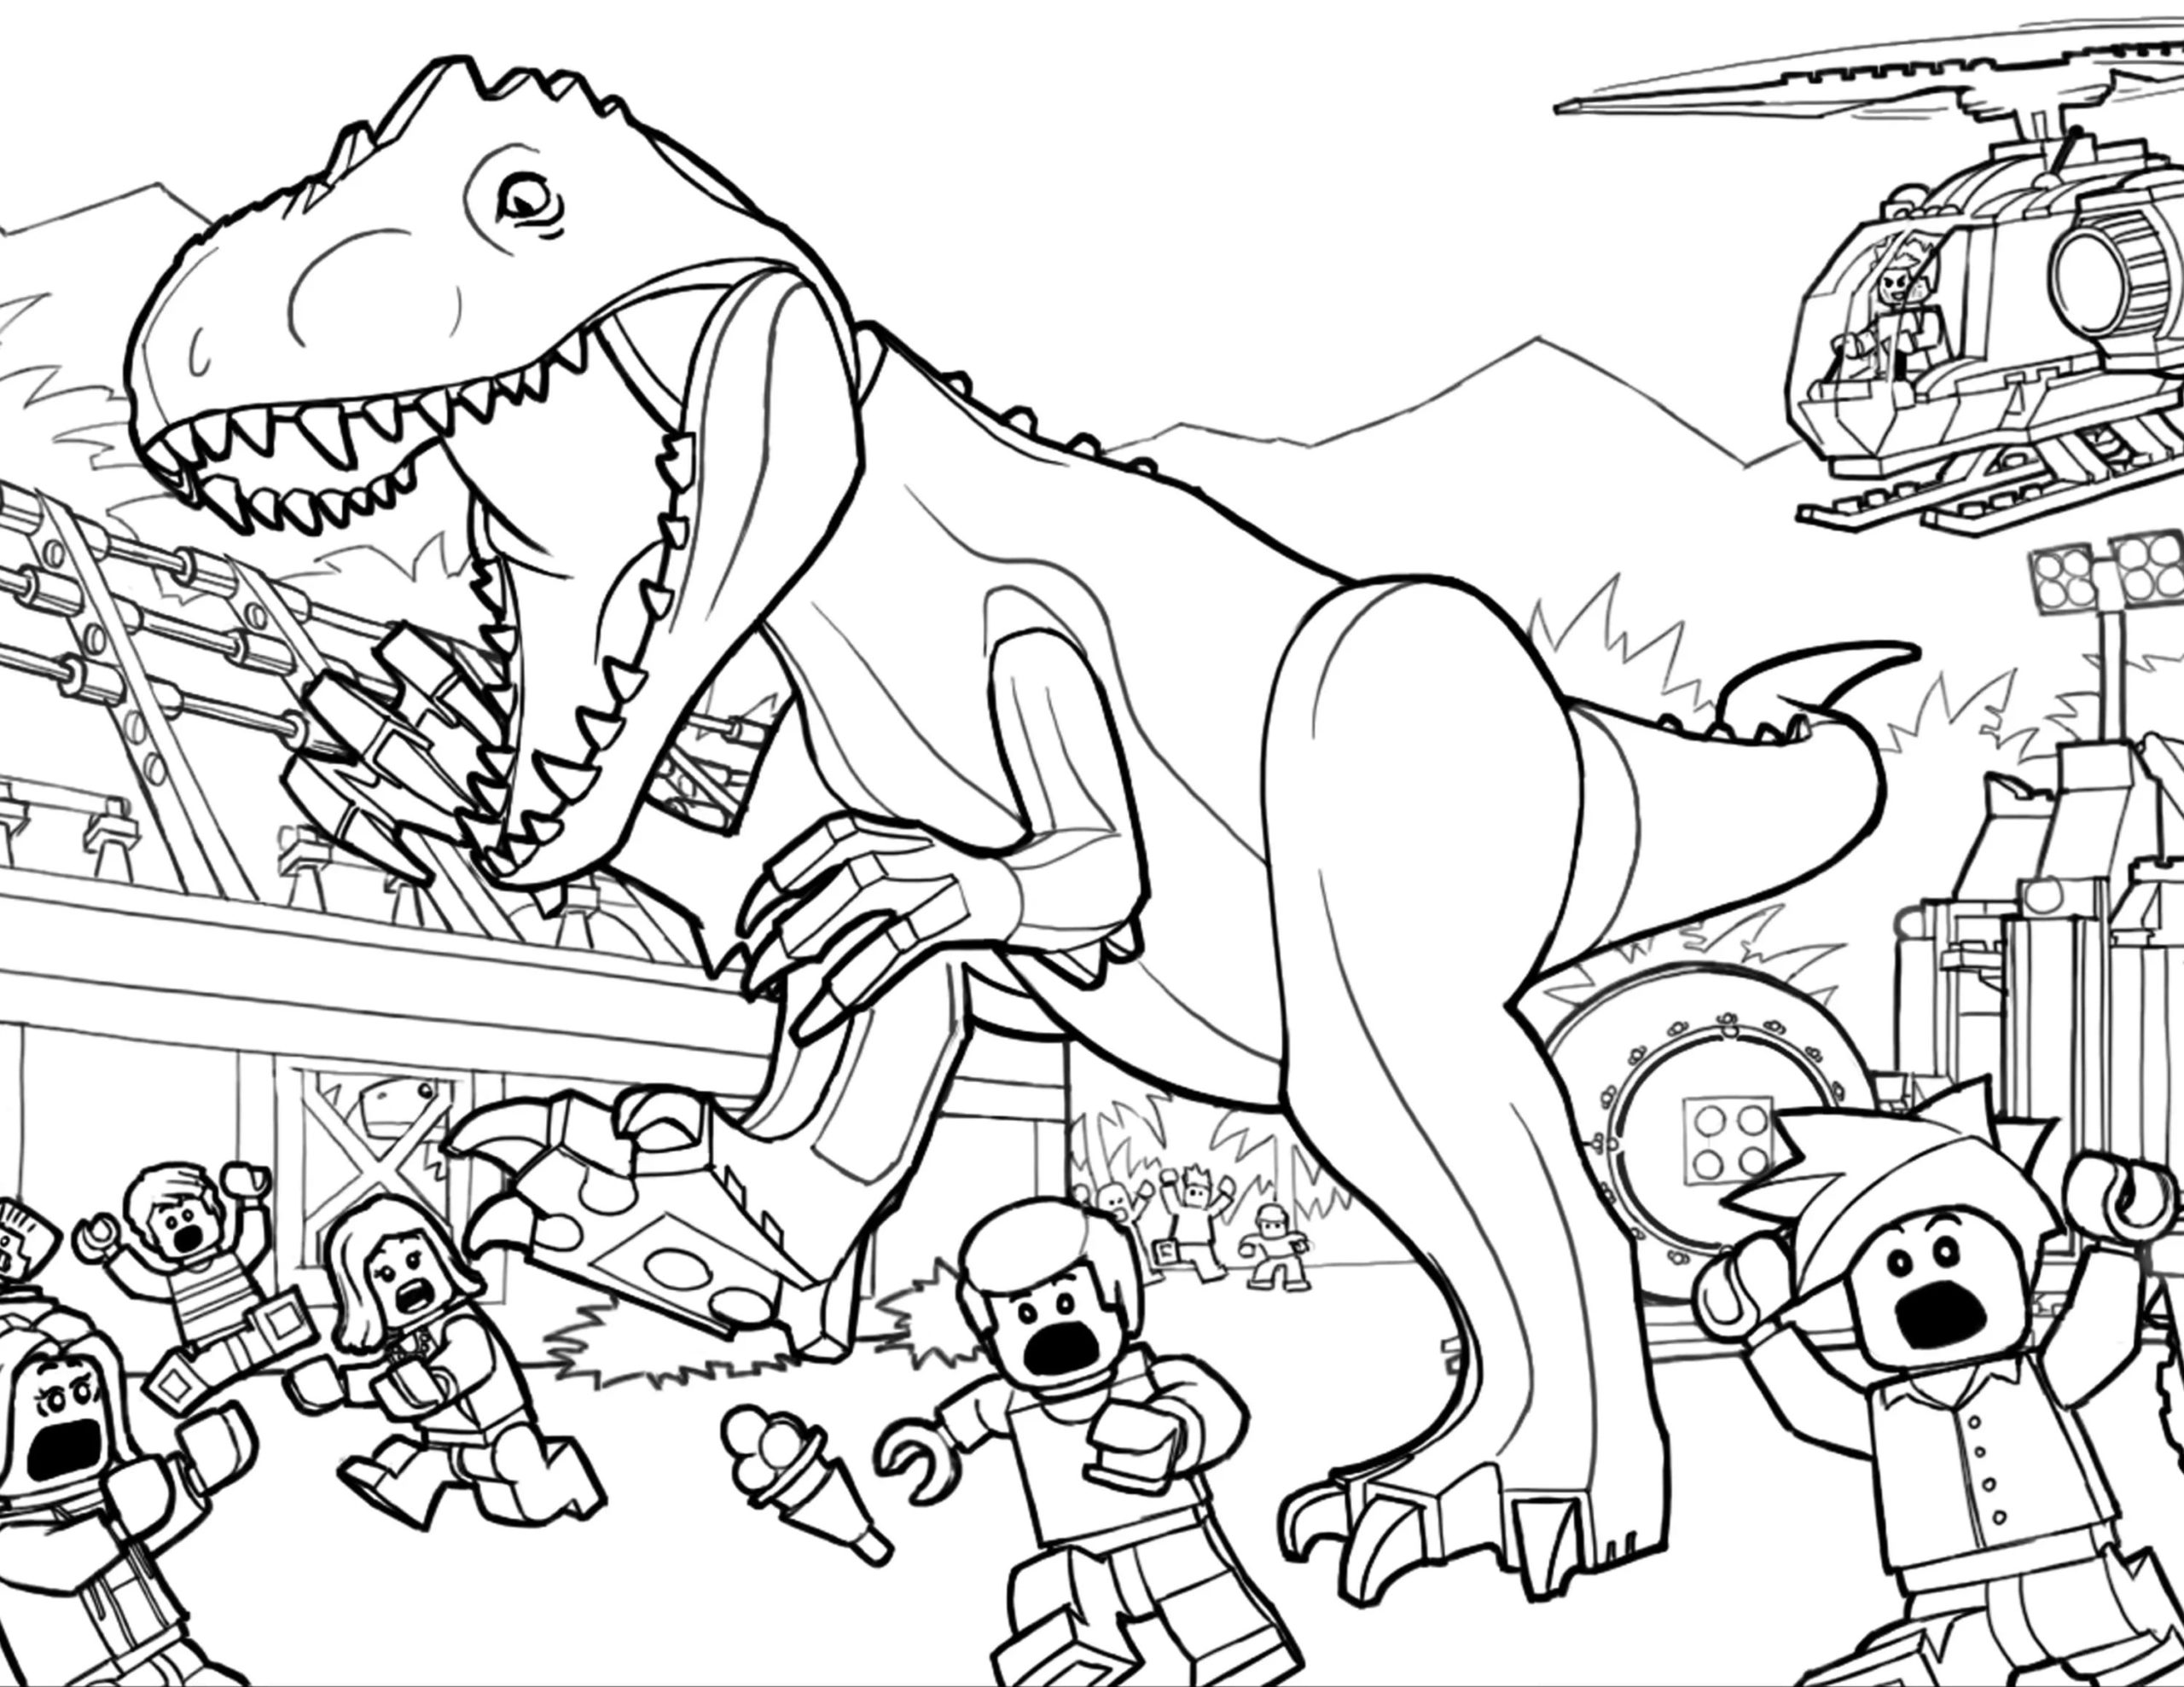 Coloring page T-rex Lego Dinosaur